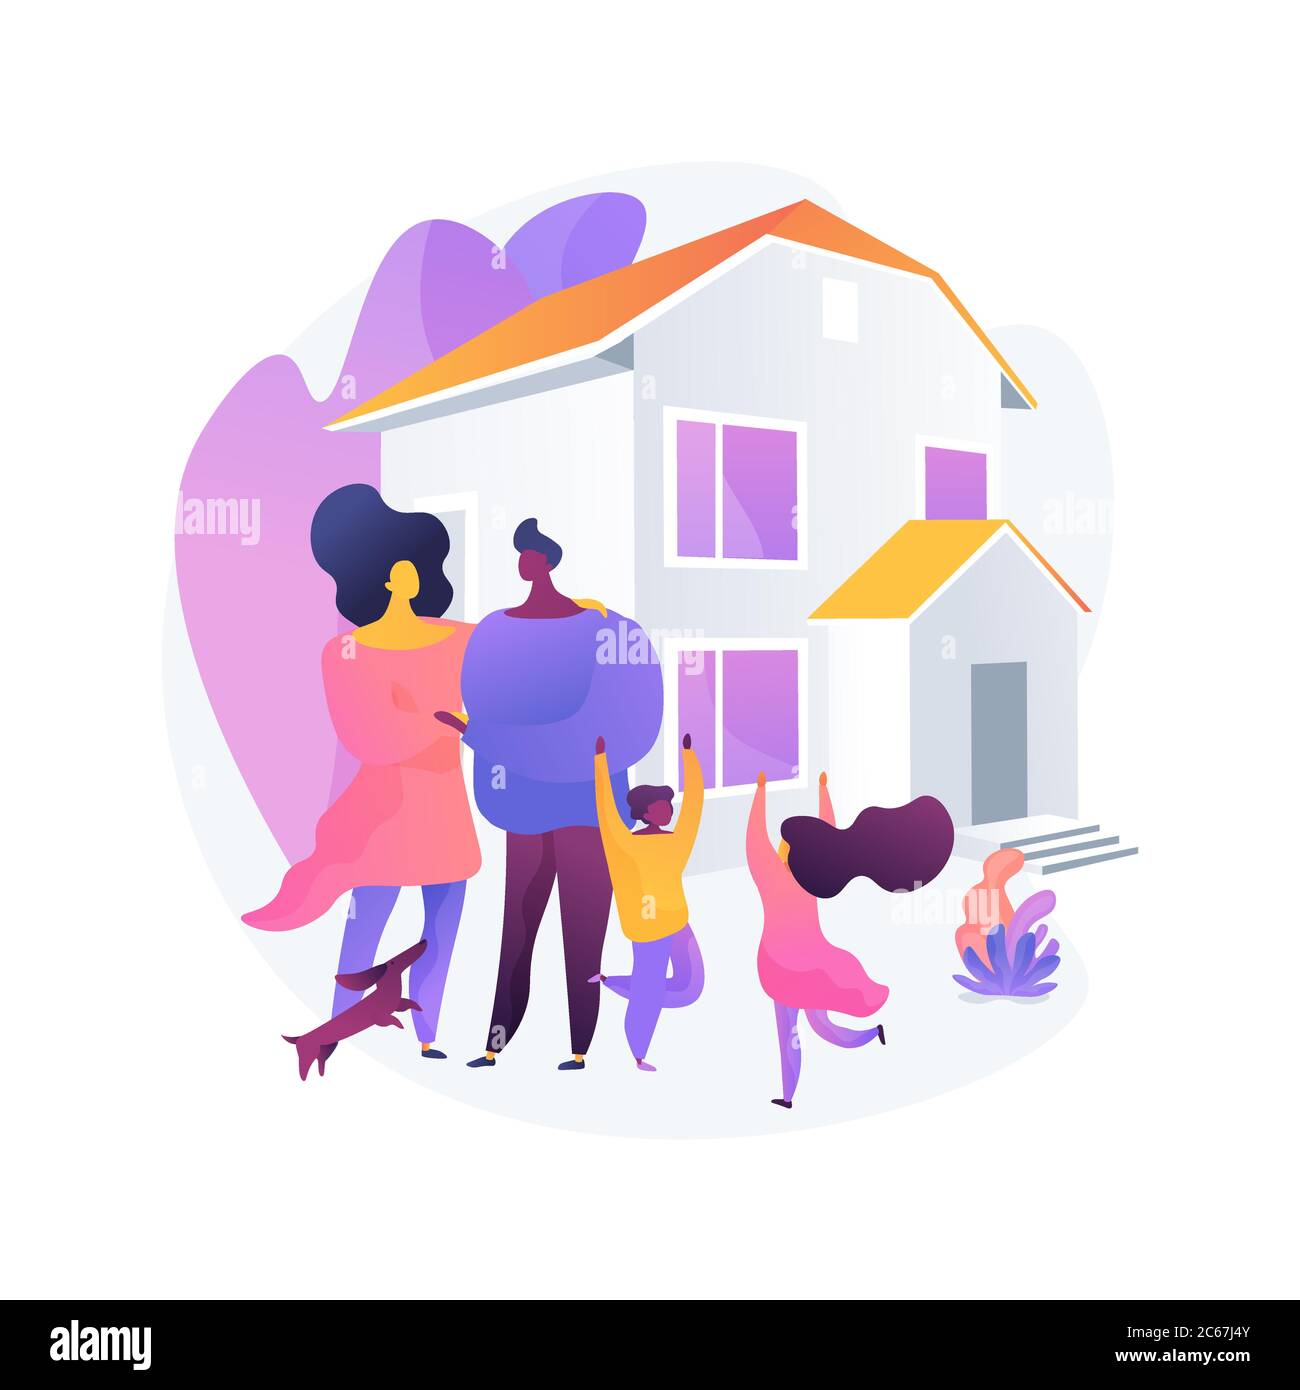 Family house abstract concept vector illustration. Stock Vector